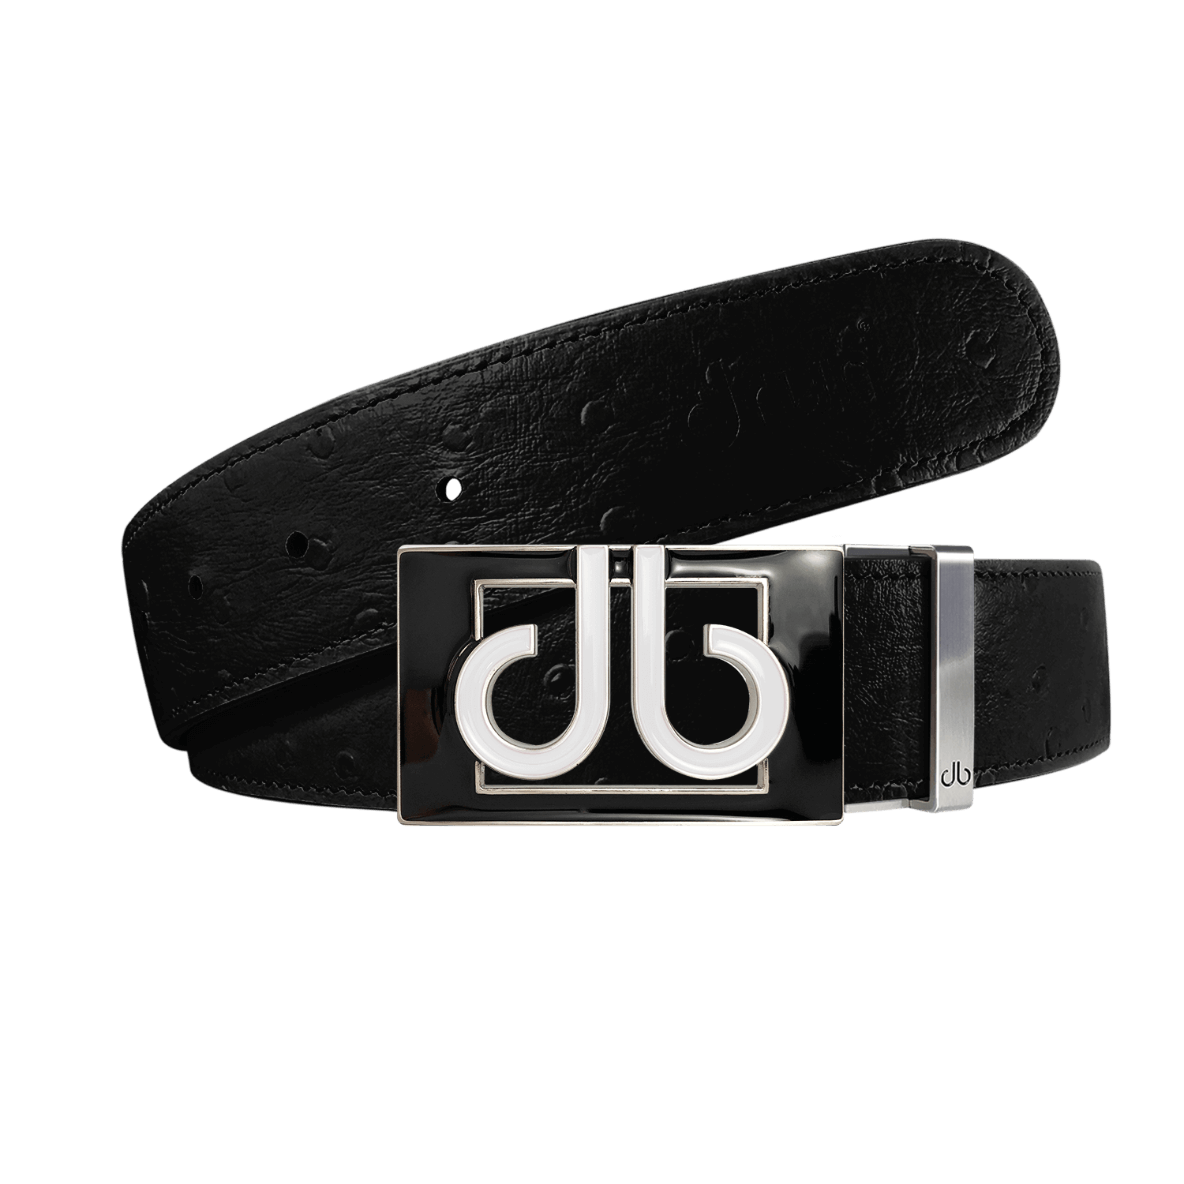 Black ostrich leather strap with db Colour thru black and white buckle